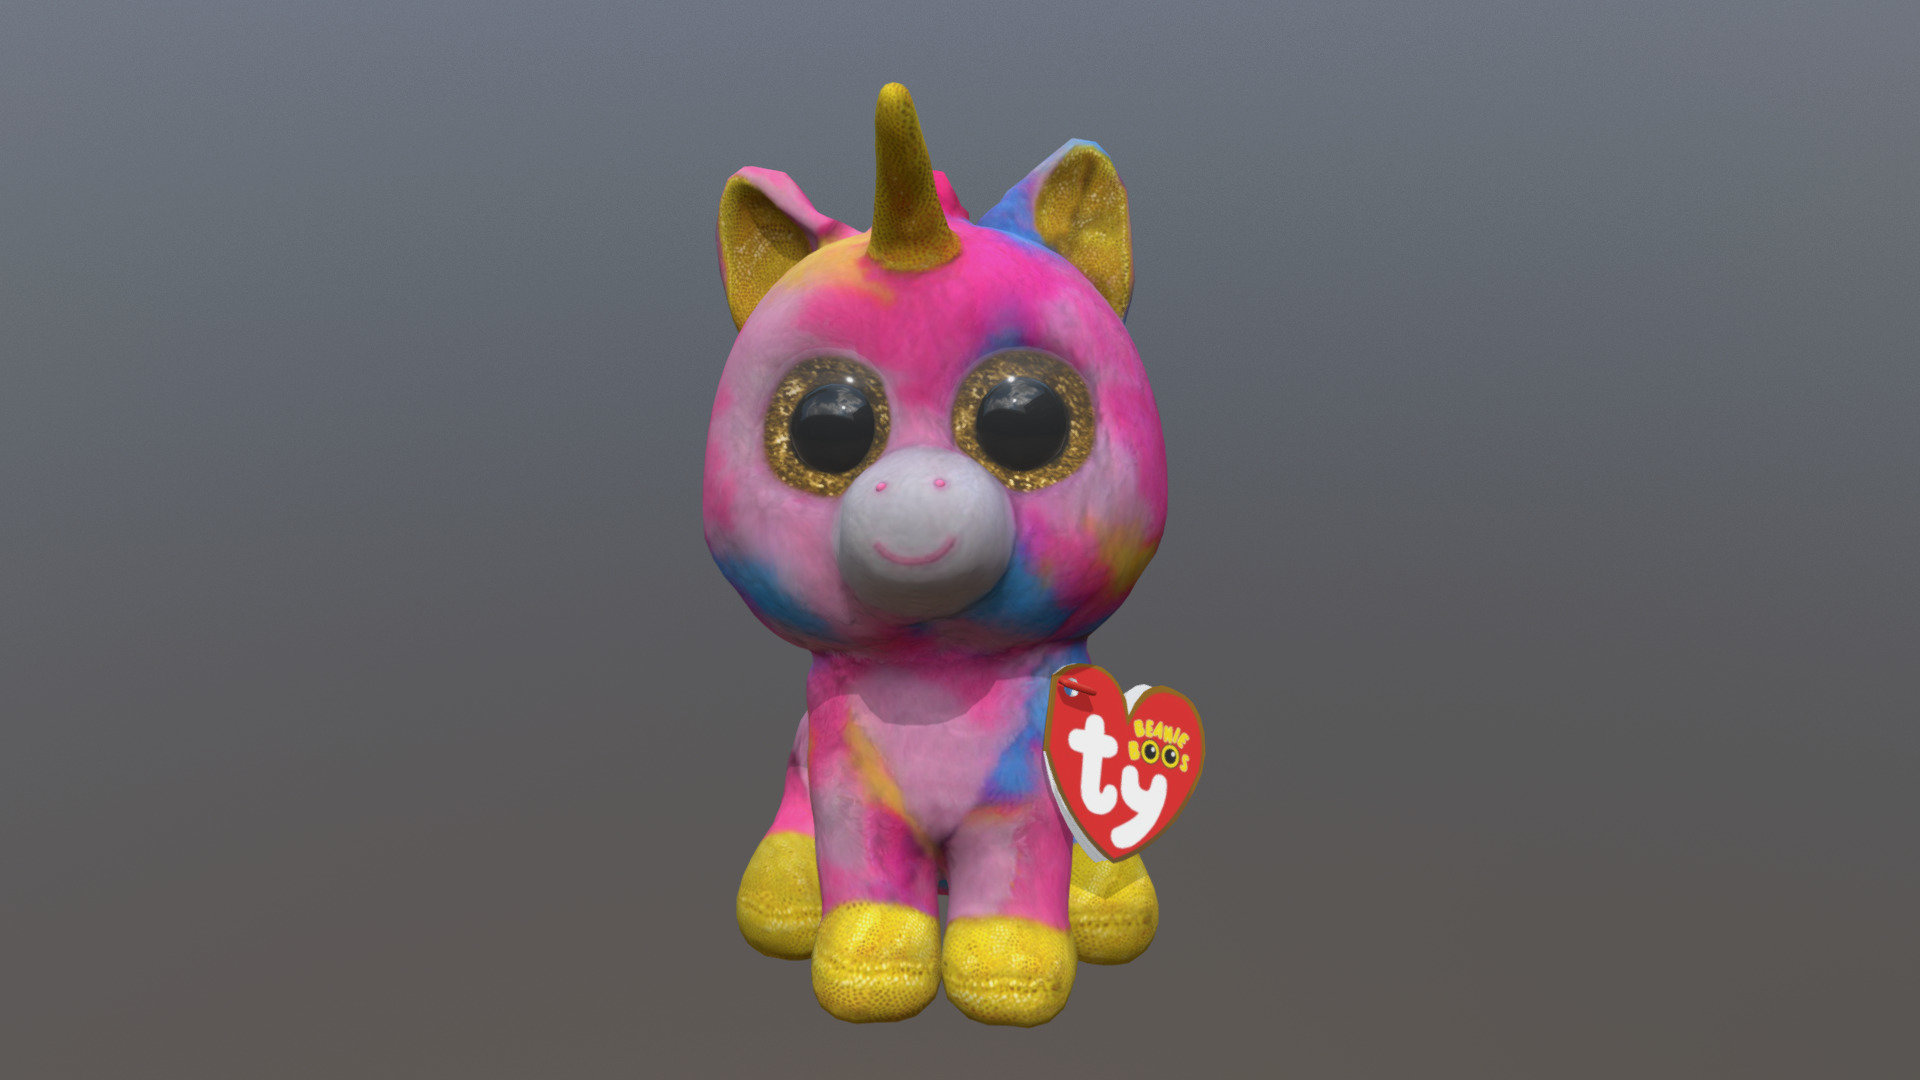 Small Beannie Boo stuff unicorn created for VR Photowhack App.
There was 10 different beannies for this app - Beannie Boo Fantasia - 3D model by katiaorozco 3d model